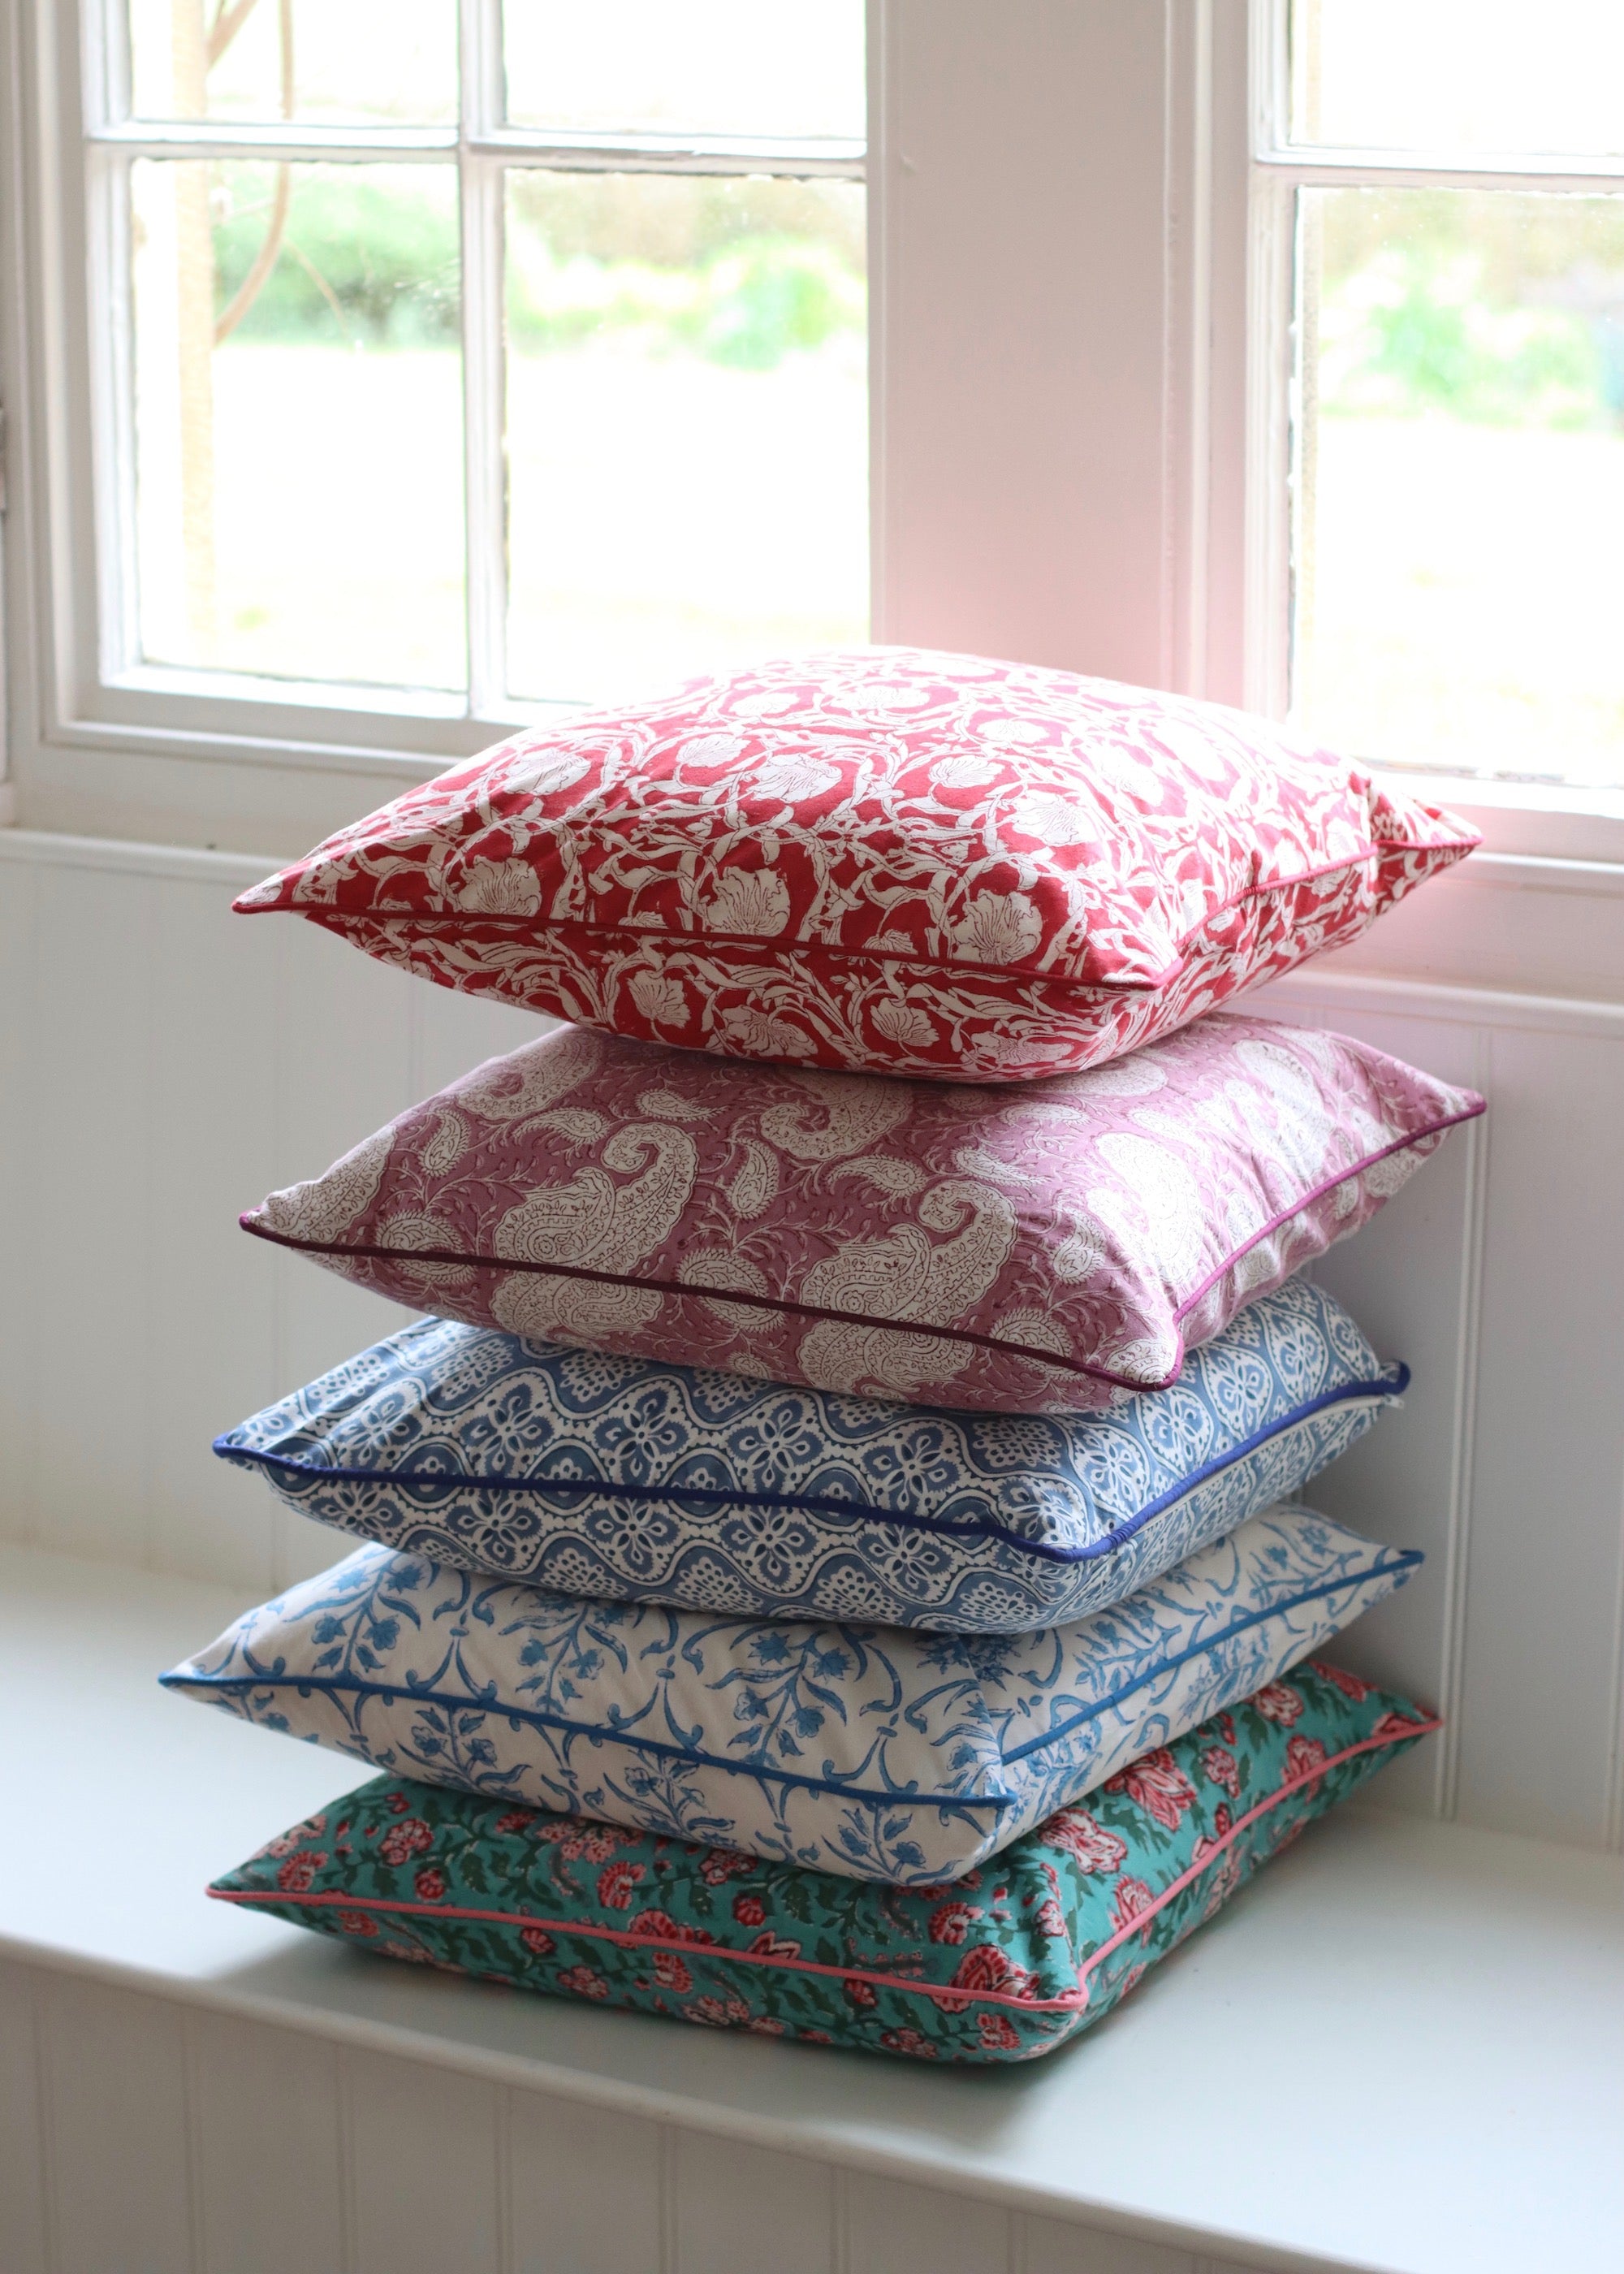 Block Print Cushion Cover - Teal and Pink Floral